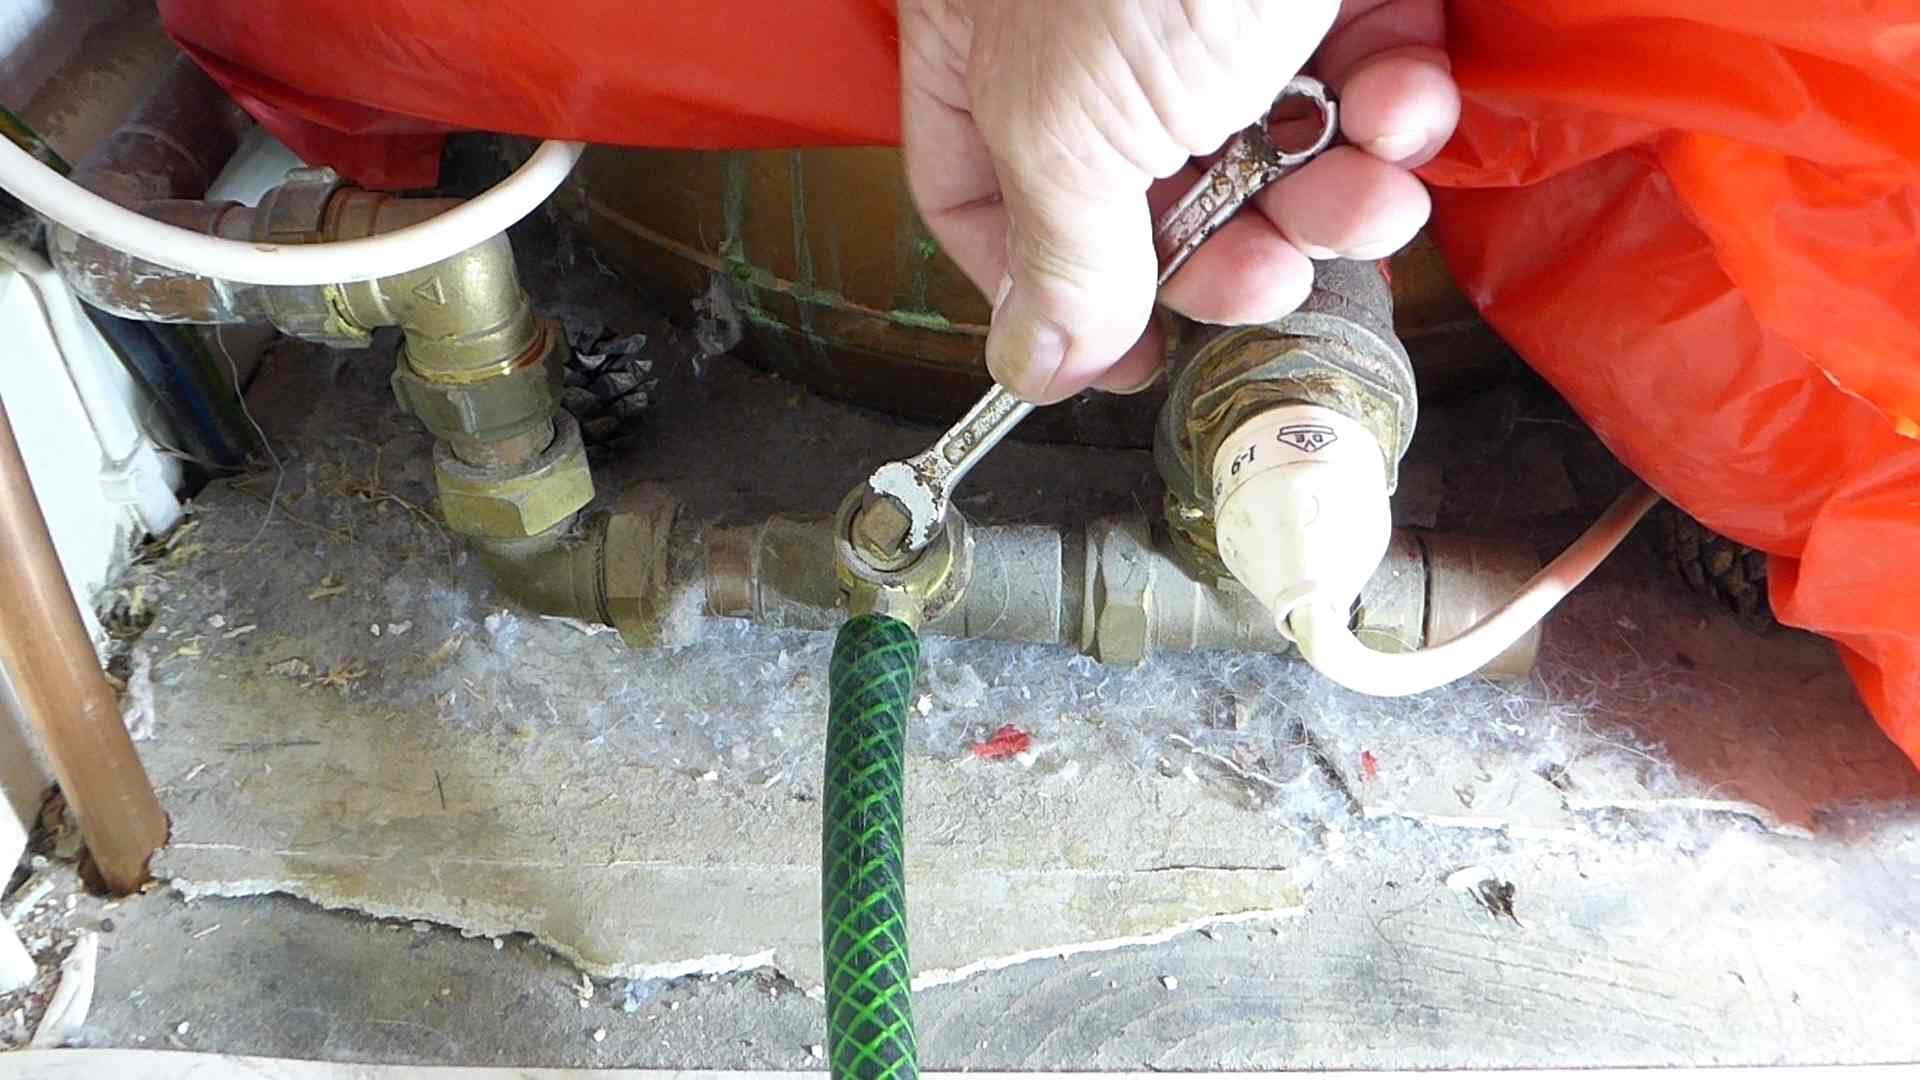 How to drain out a hot water cylinder (hot tank) - YouTube